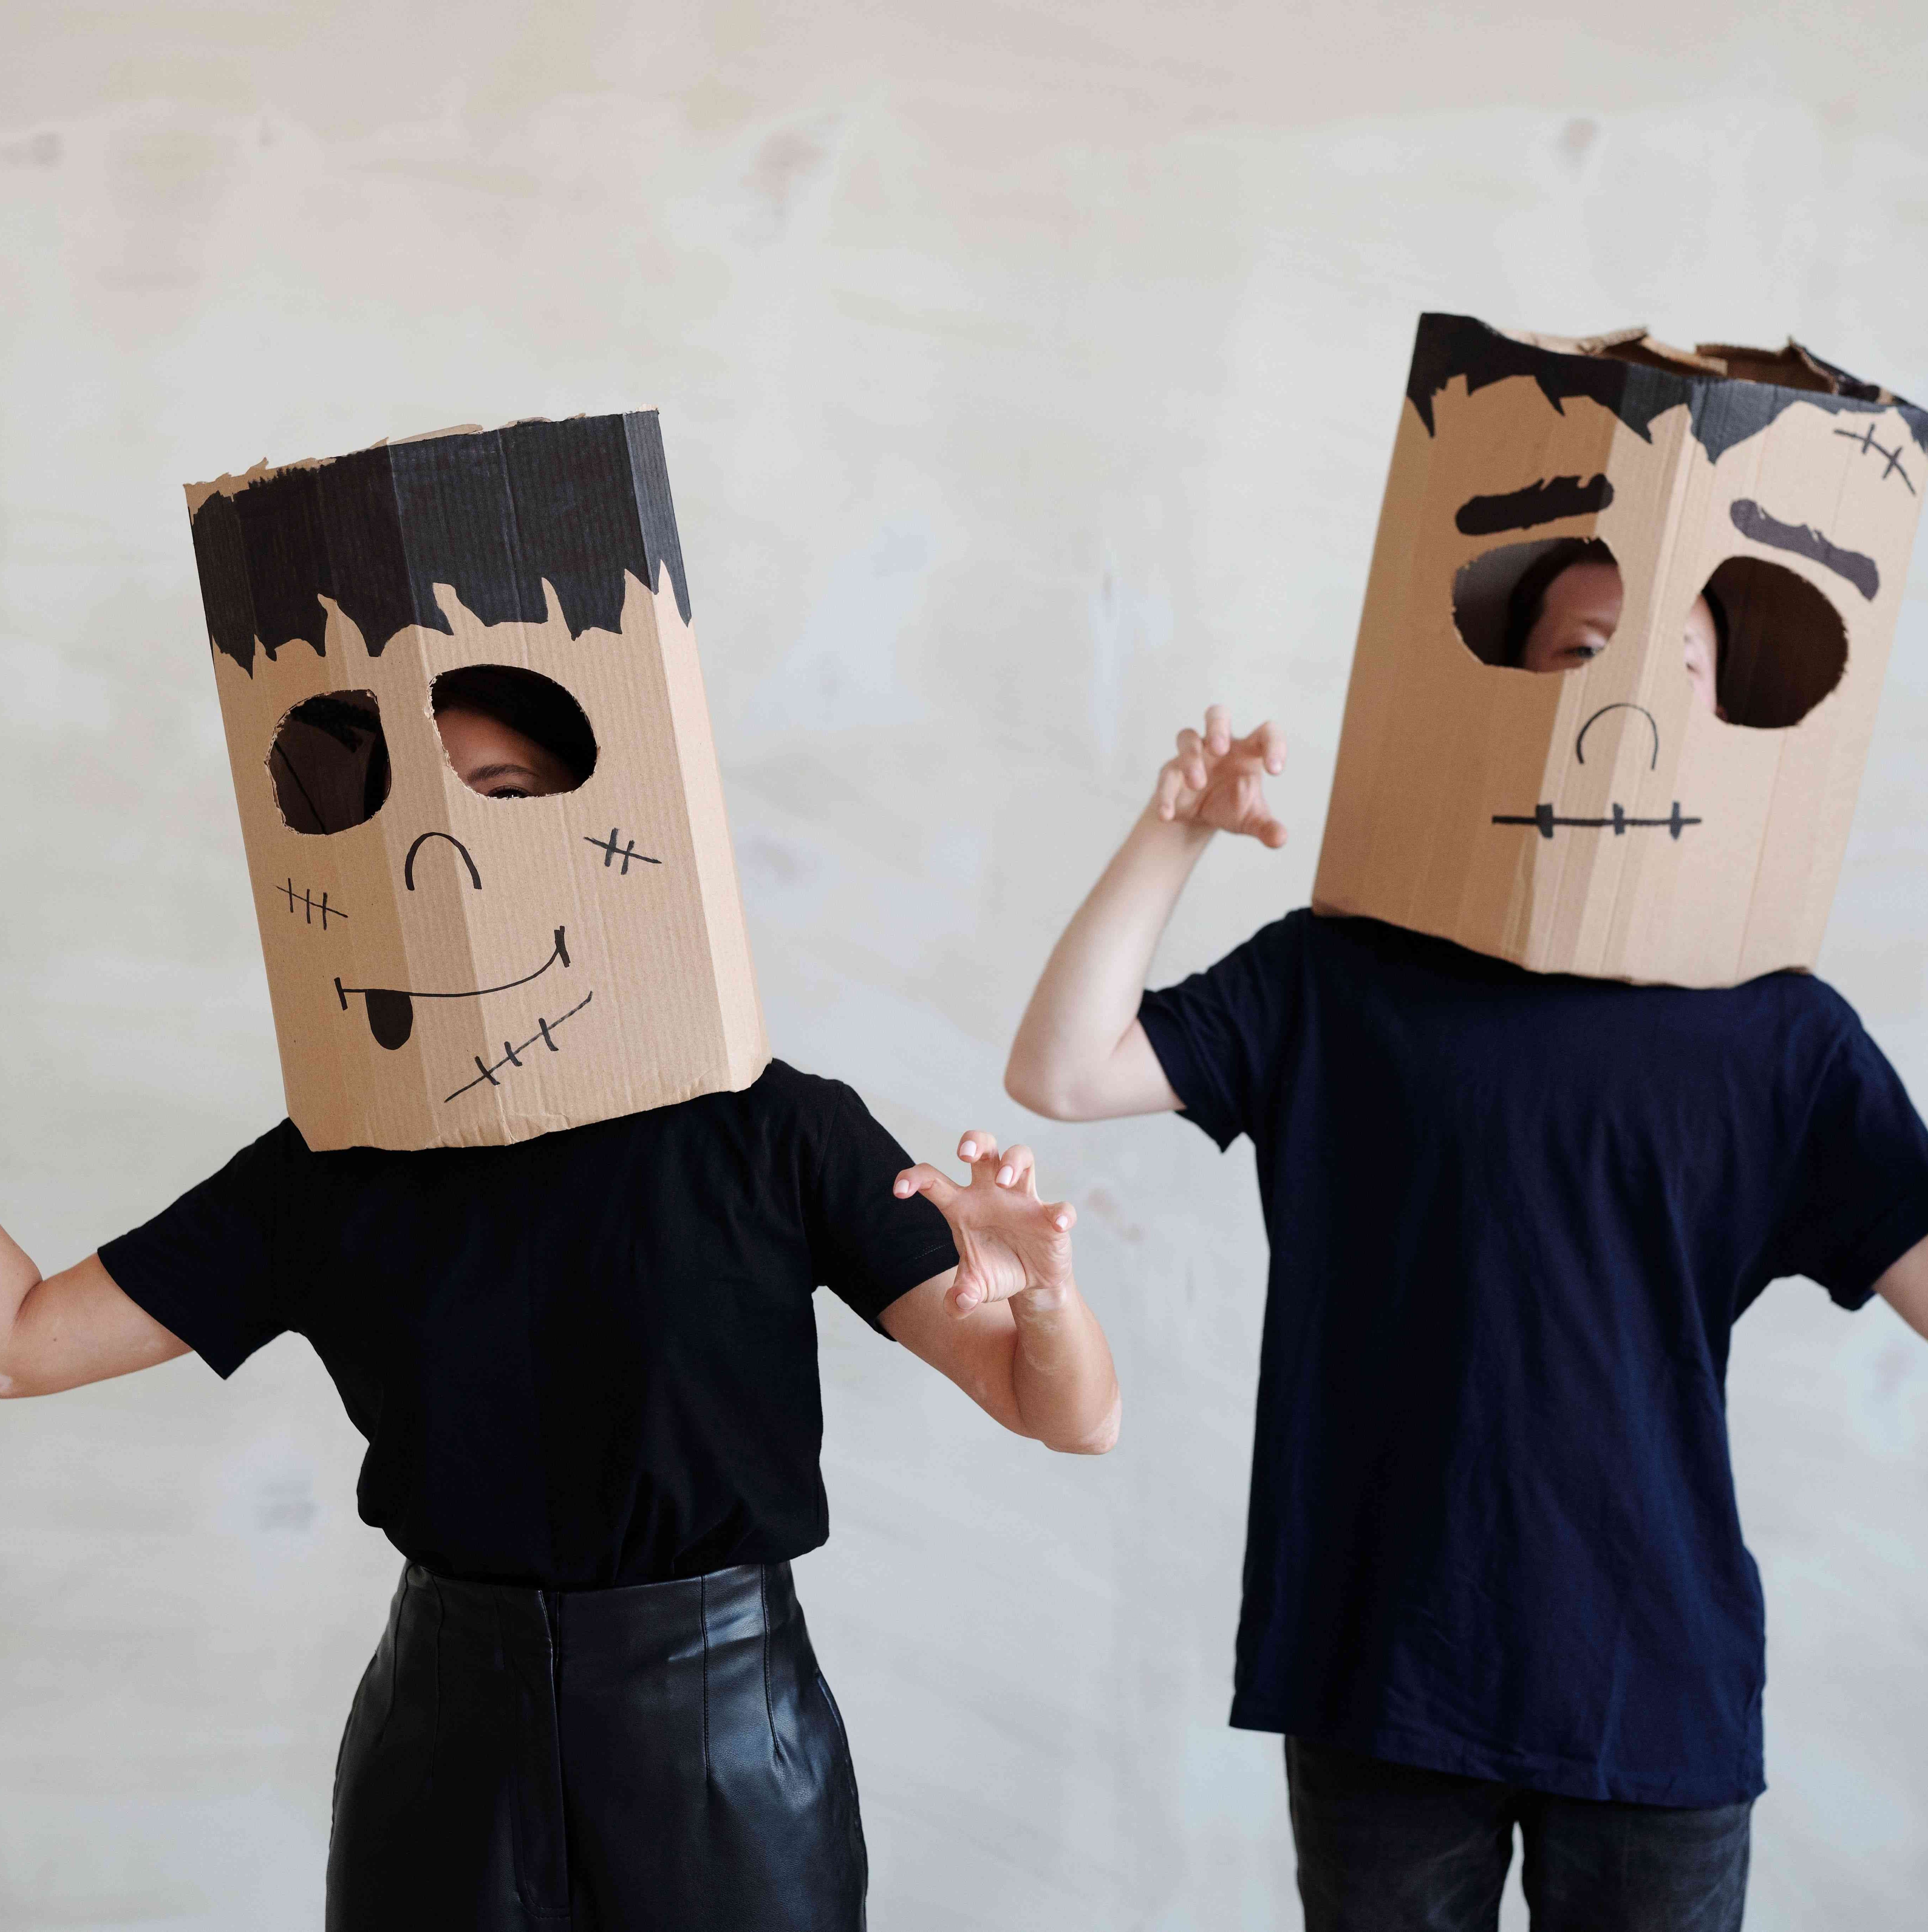 Two persons with cardboard boxes on their heads dressed as Frankensteins